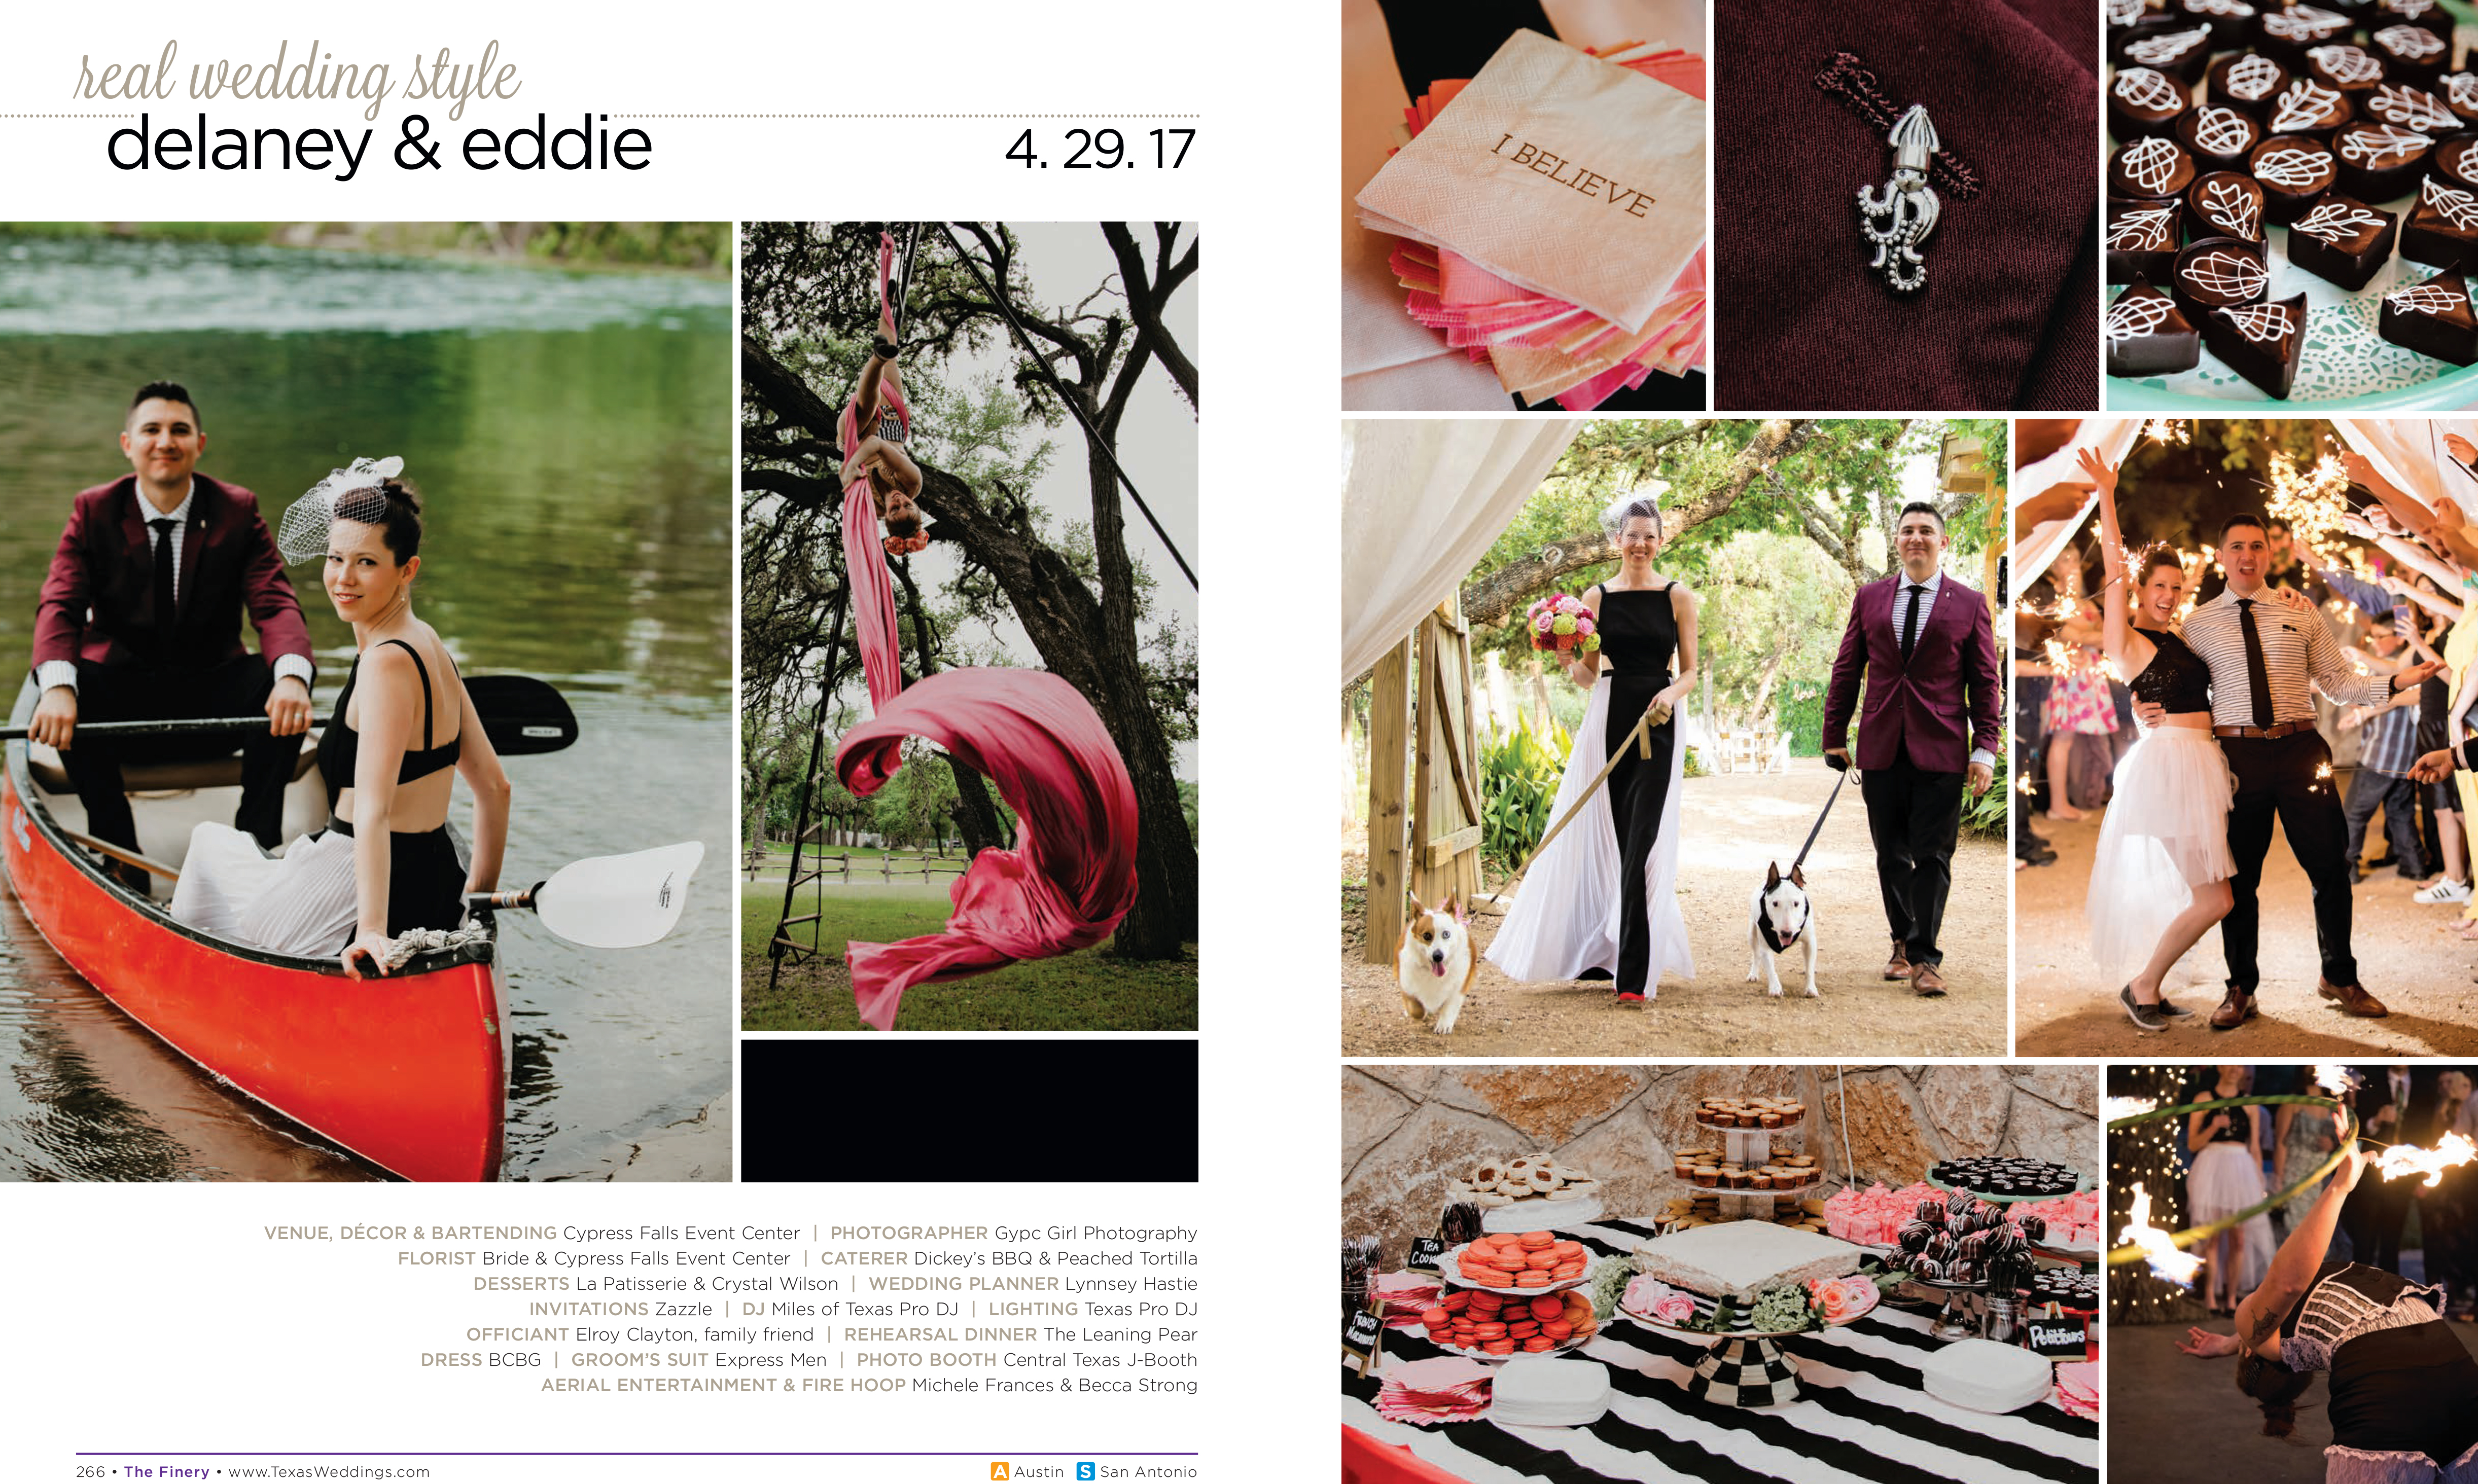 Delaney & Eddie in their Real Wedding Page in the Fall/Winter 2017 Texas Wedding Guide